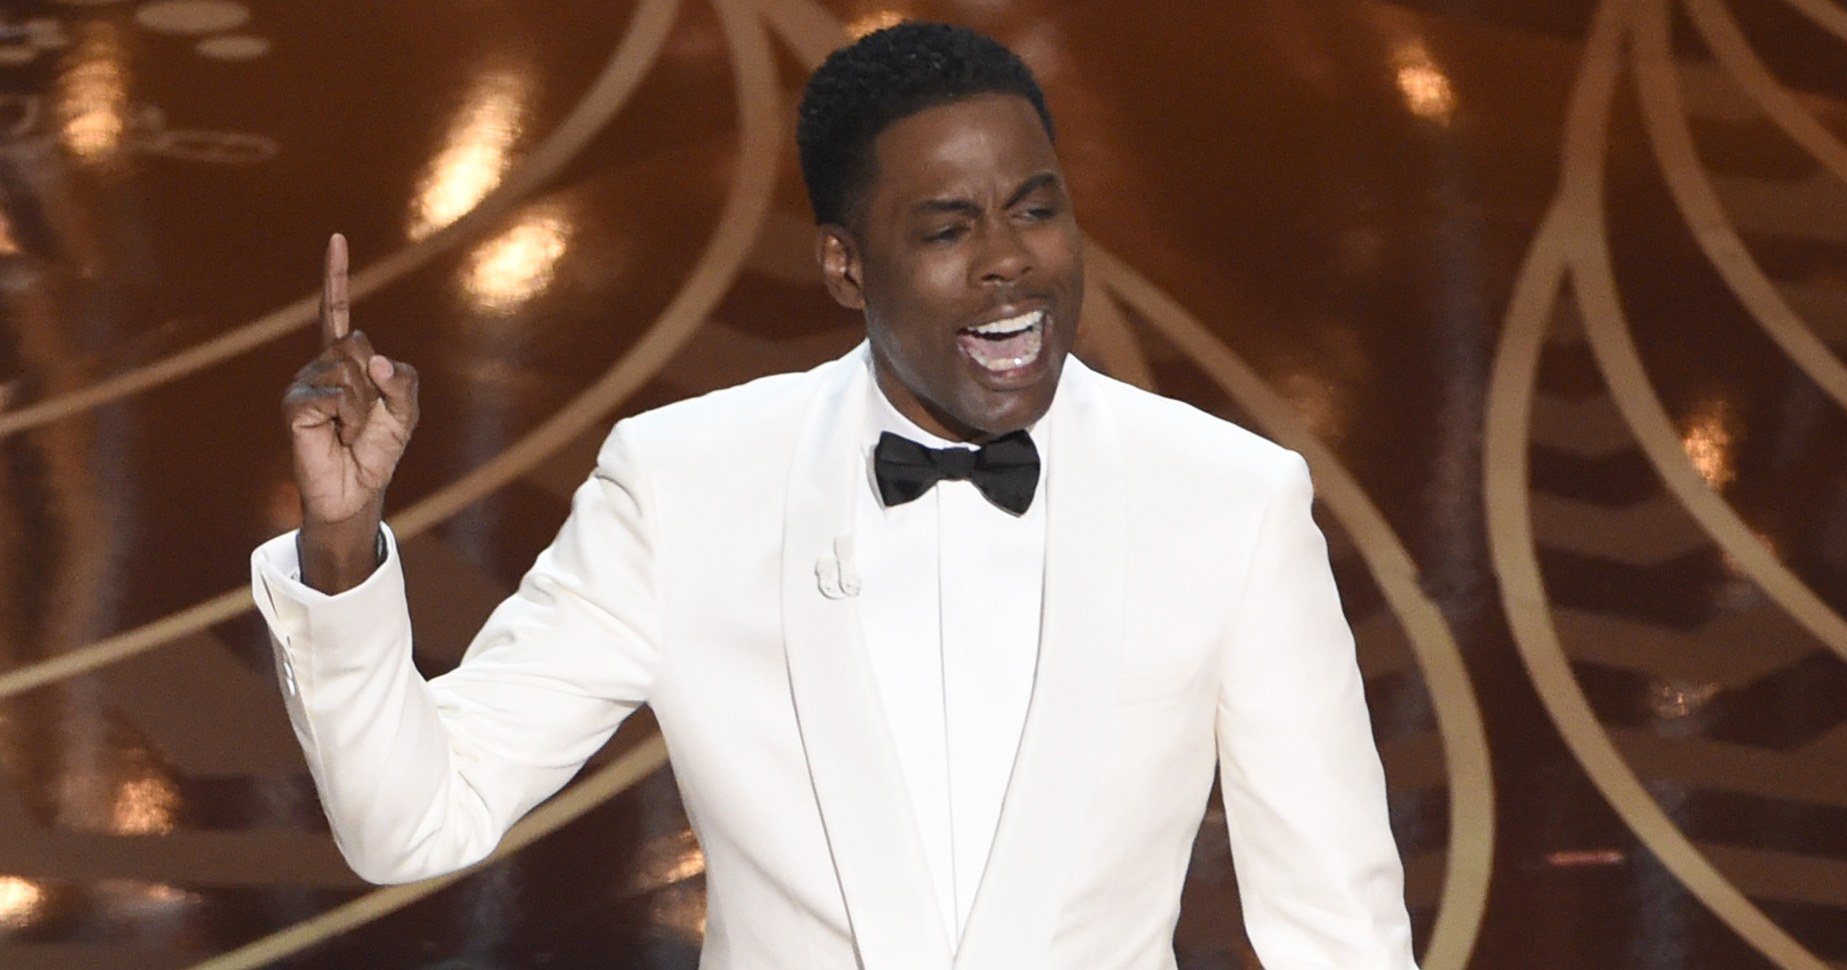 Chris Rock speaks at the Oscars on Feb. 28, 2016 in Hollywood, Calif.